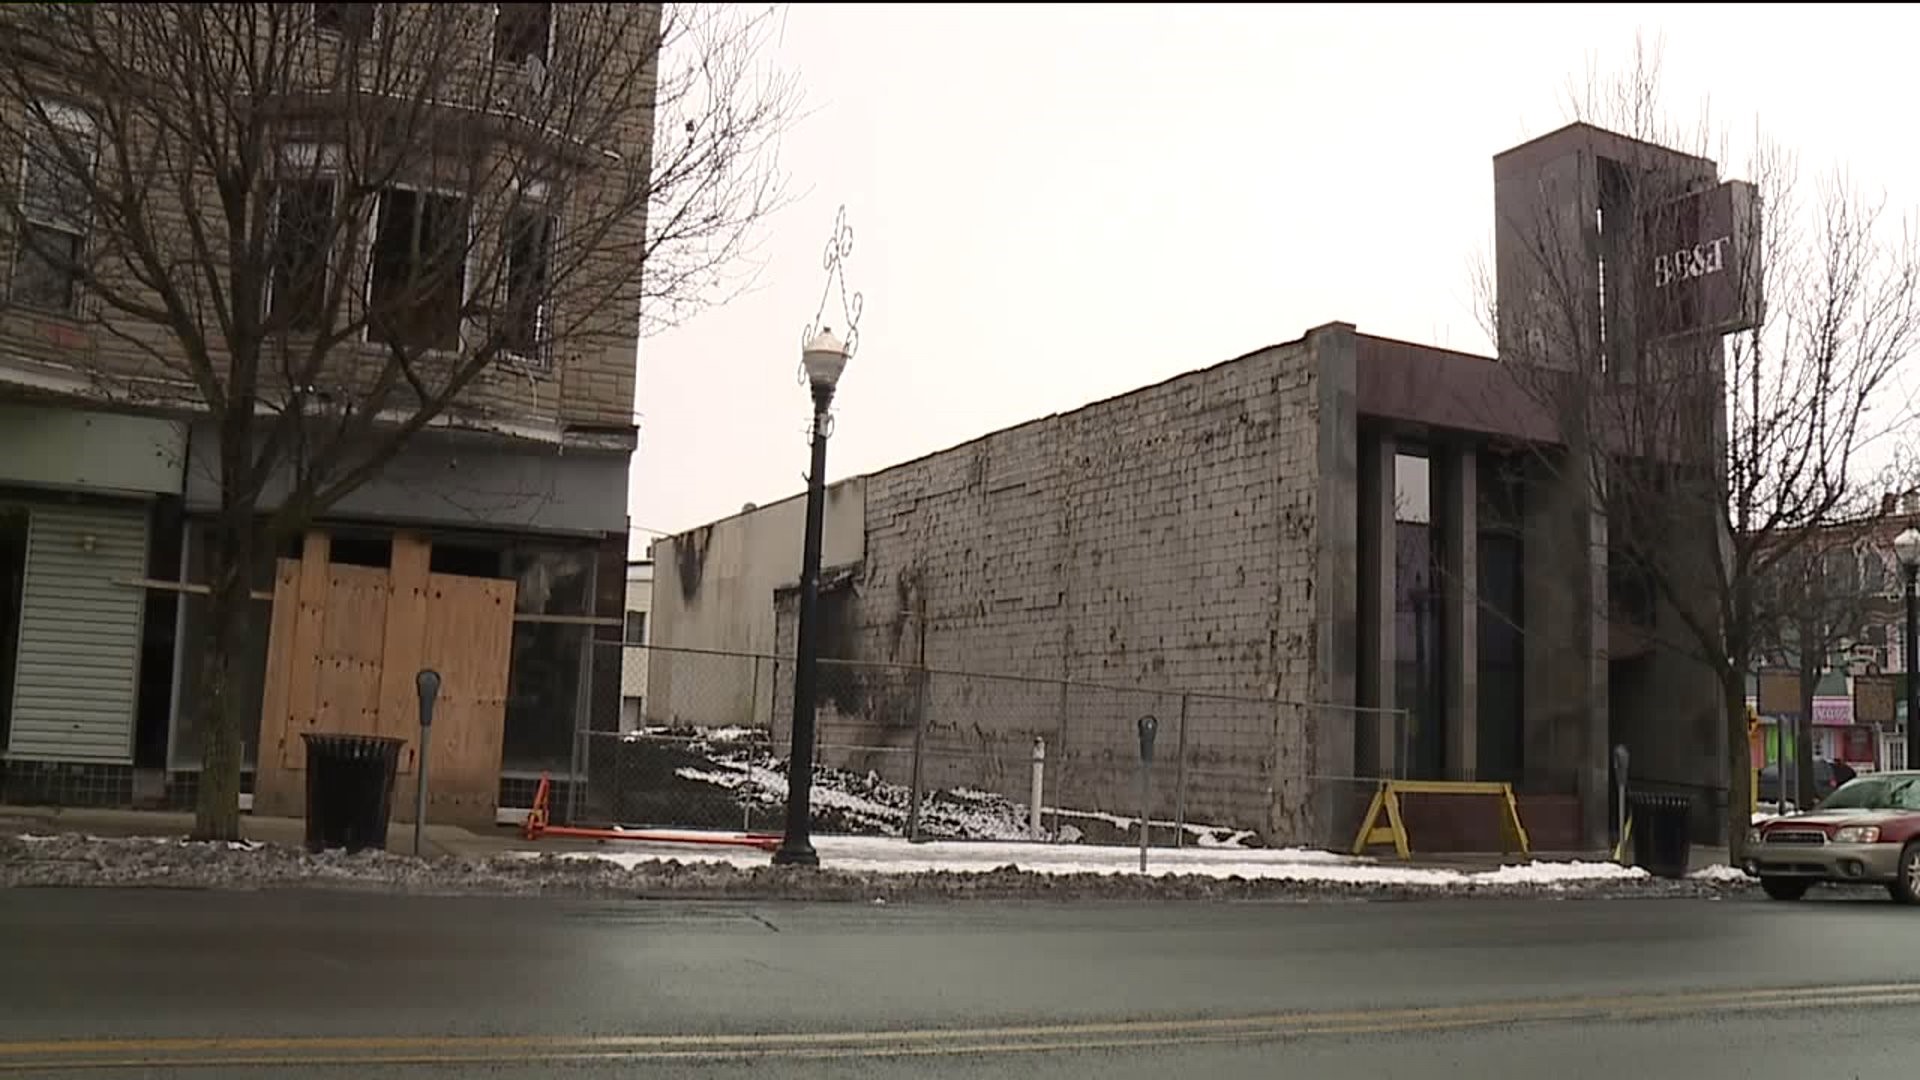 Schuylkill County Working to Rid Communities of Blight